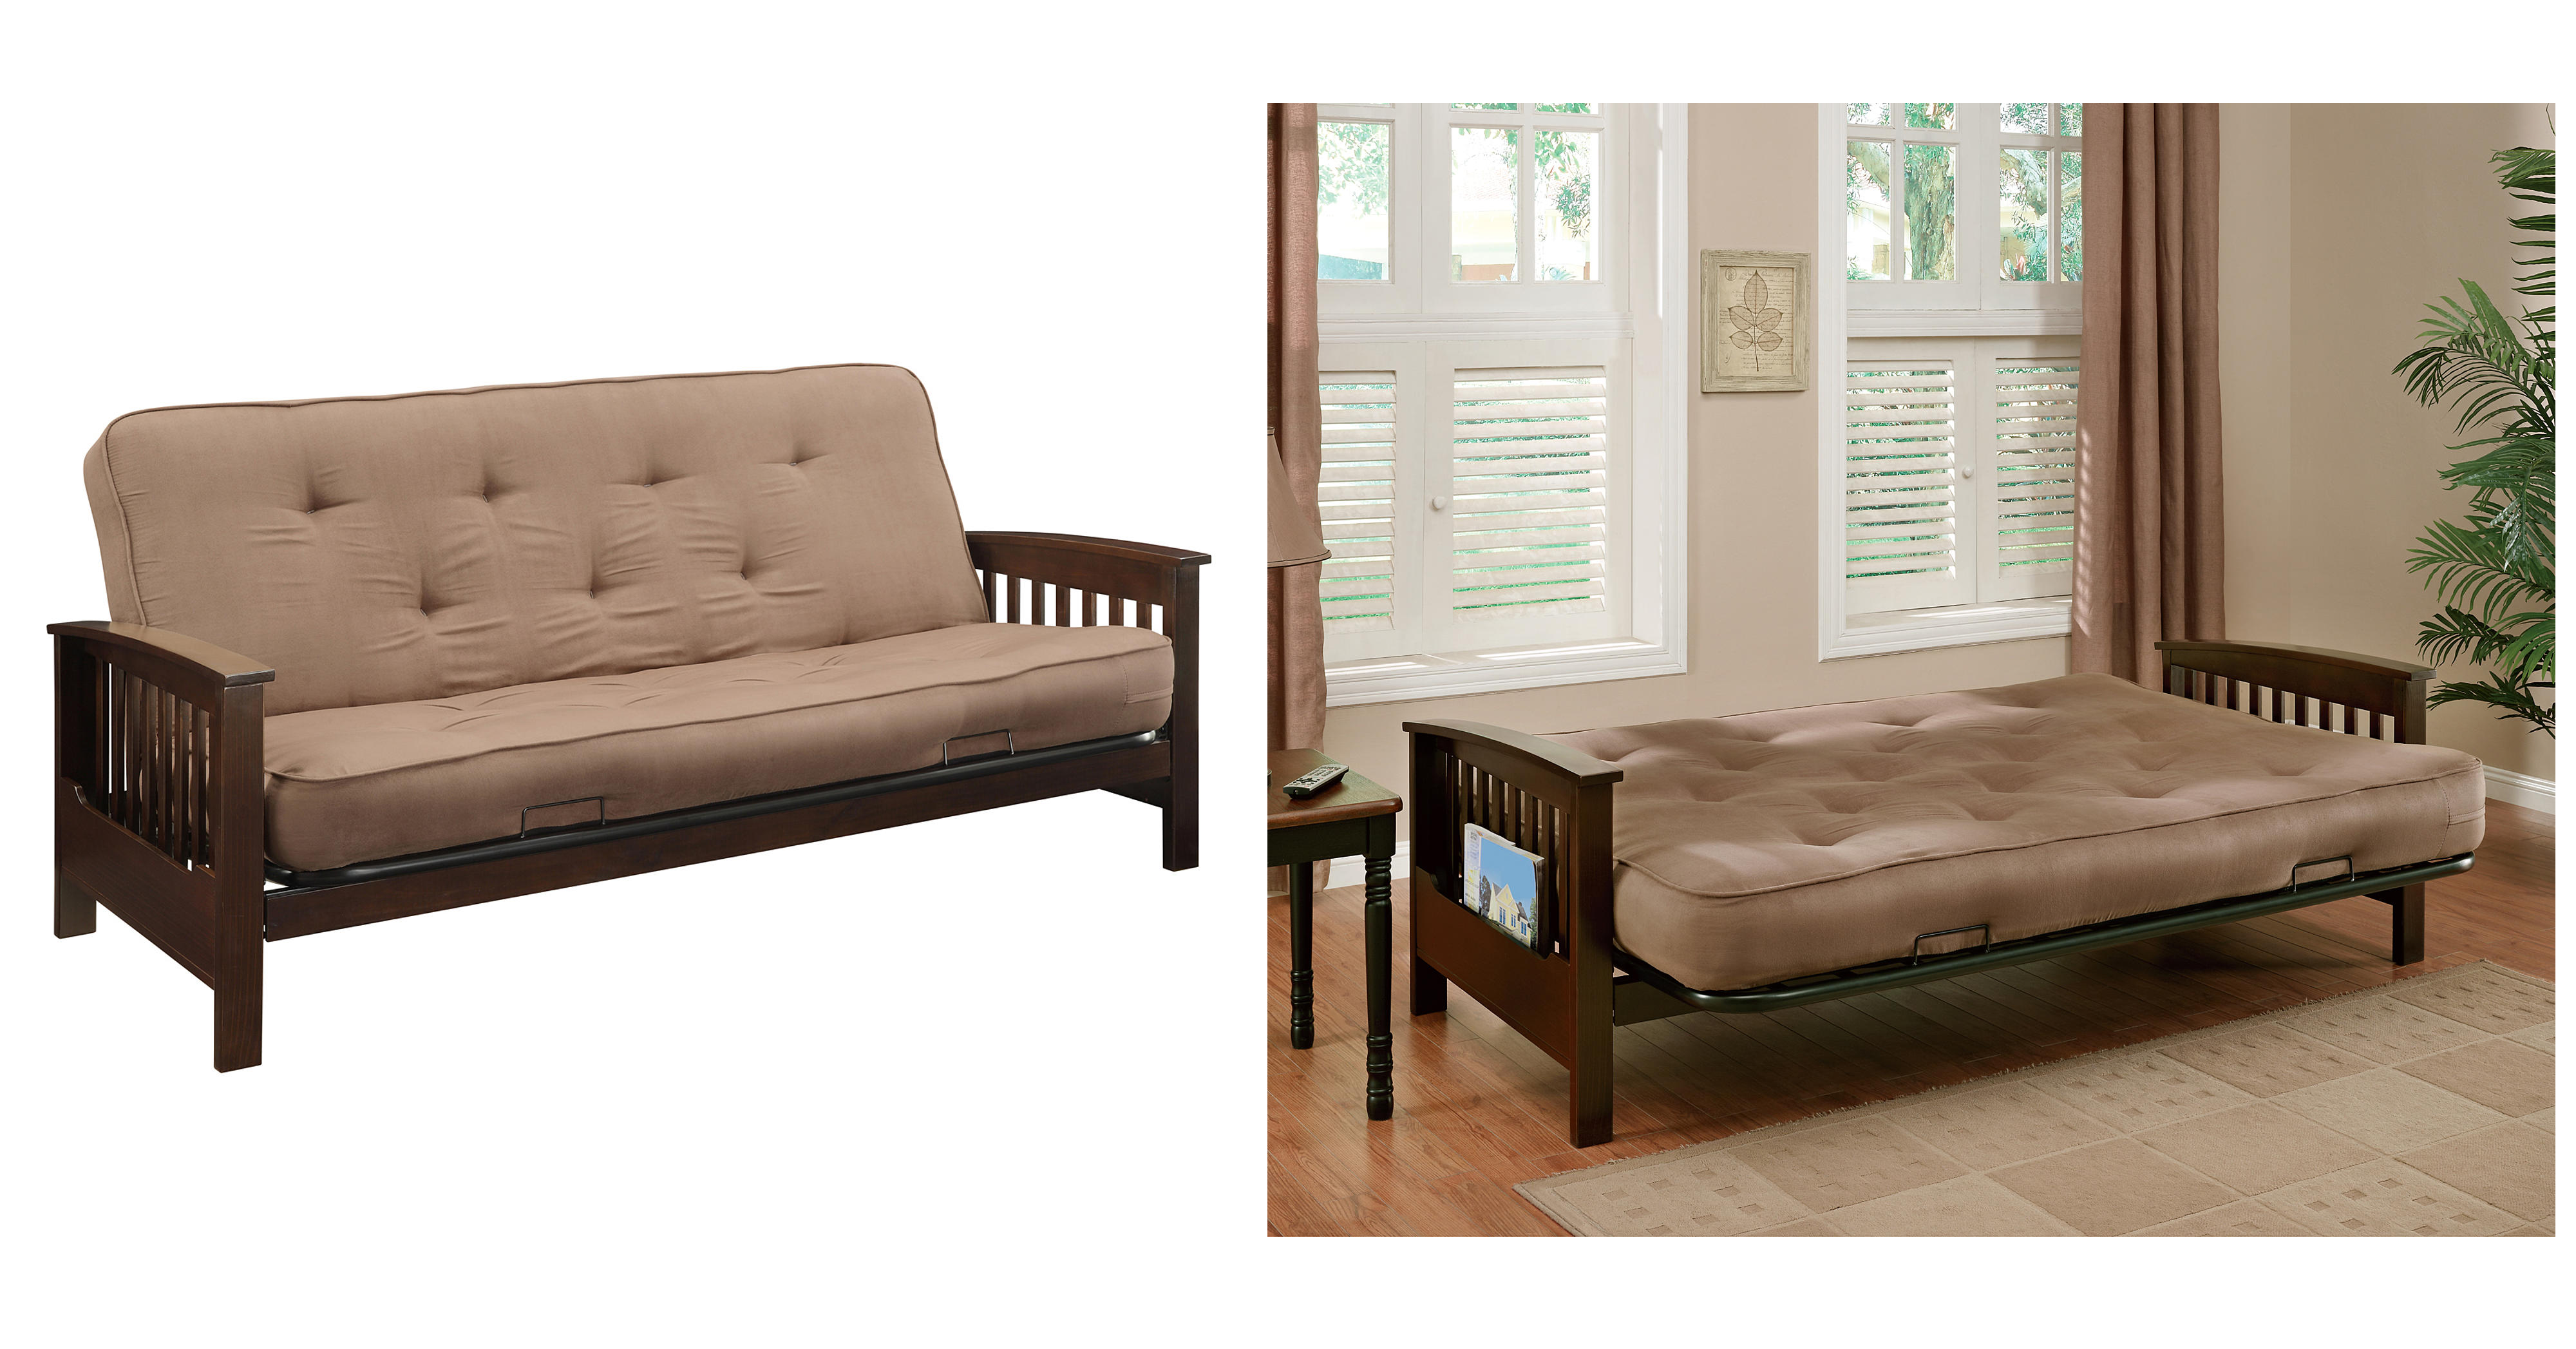 Kmart: Essential Home Heritage Futon & Mattress Only $191.25 + $122.10 Back in SYWR Points!